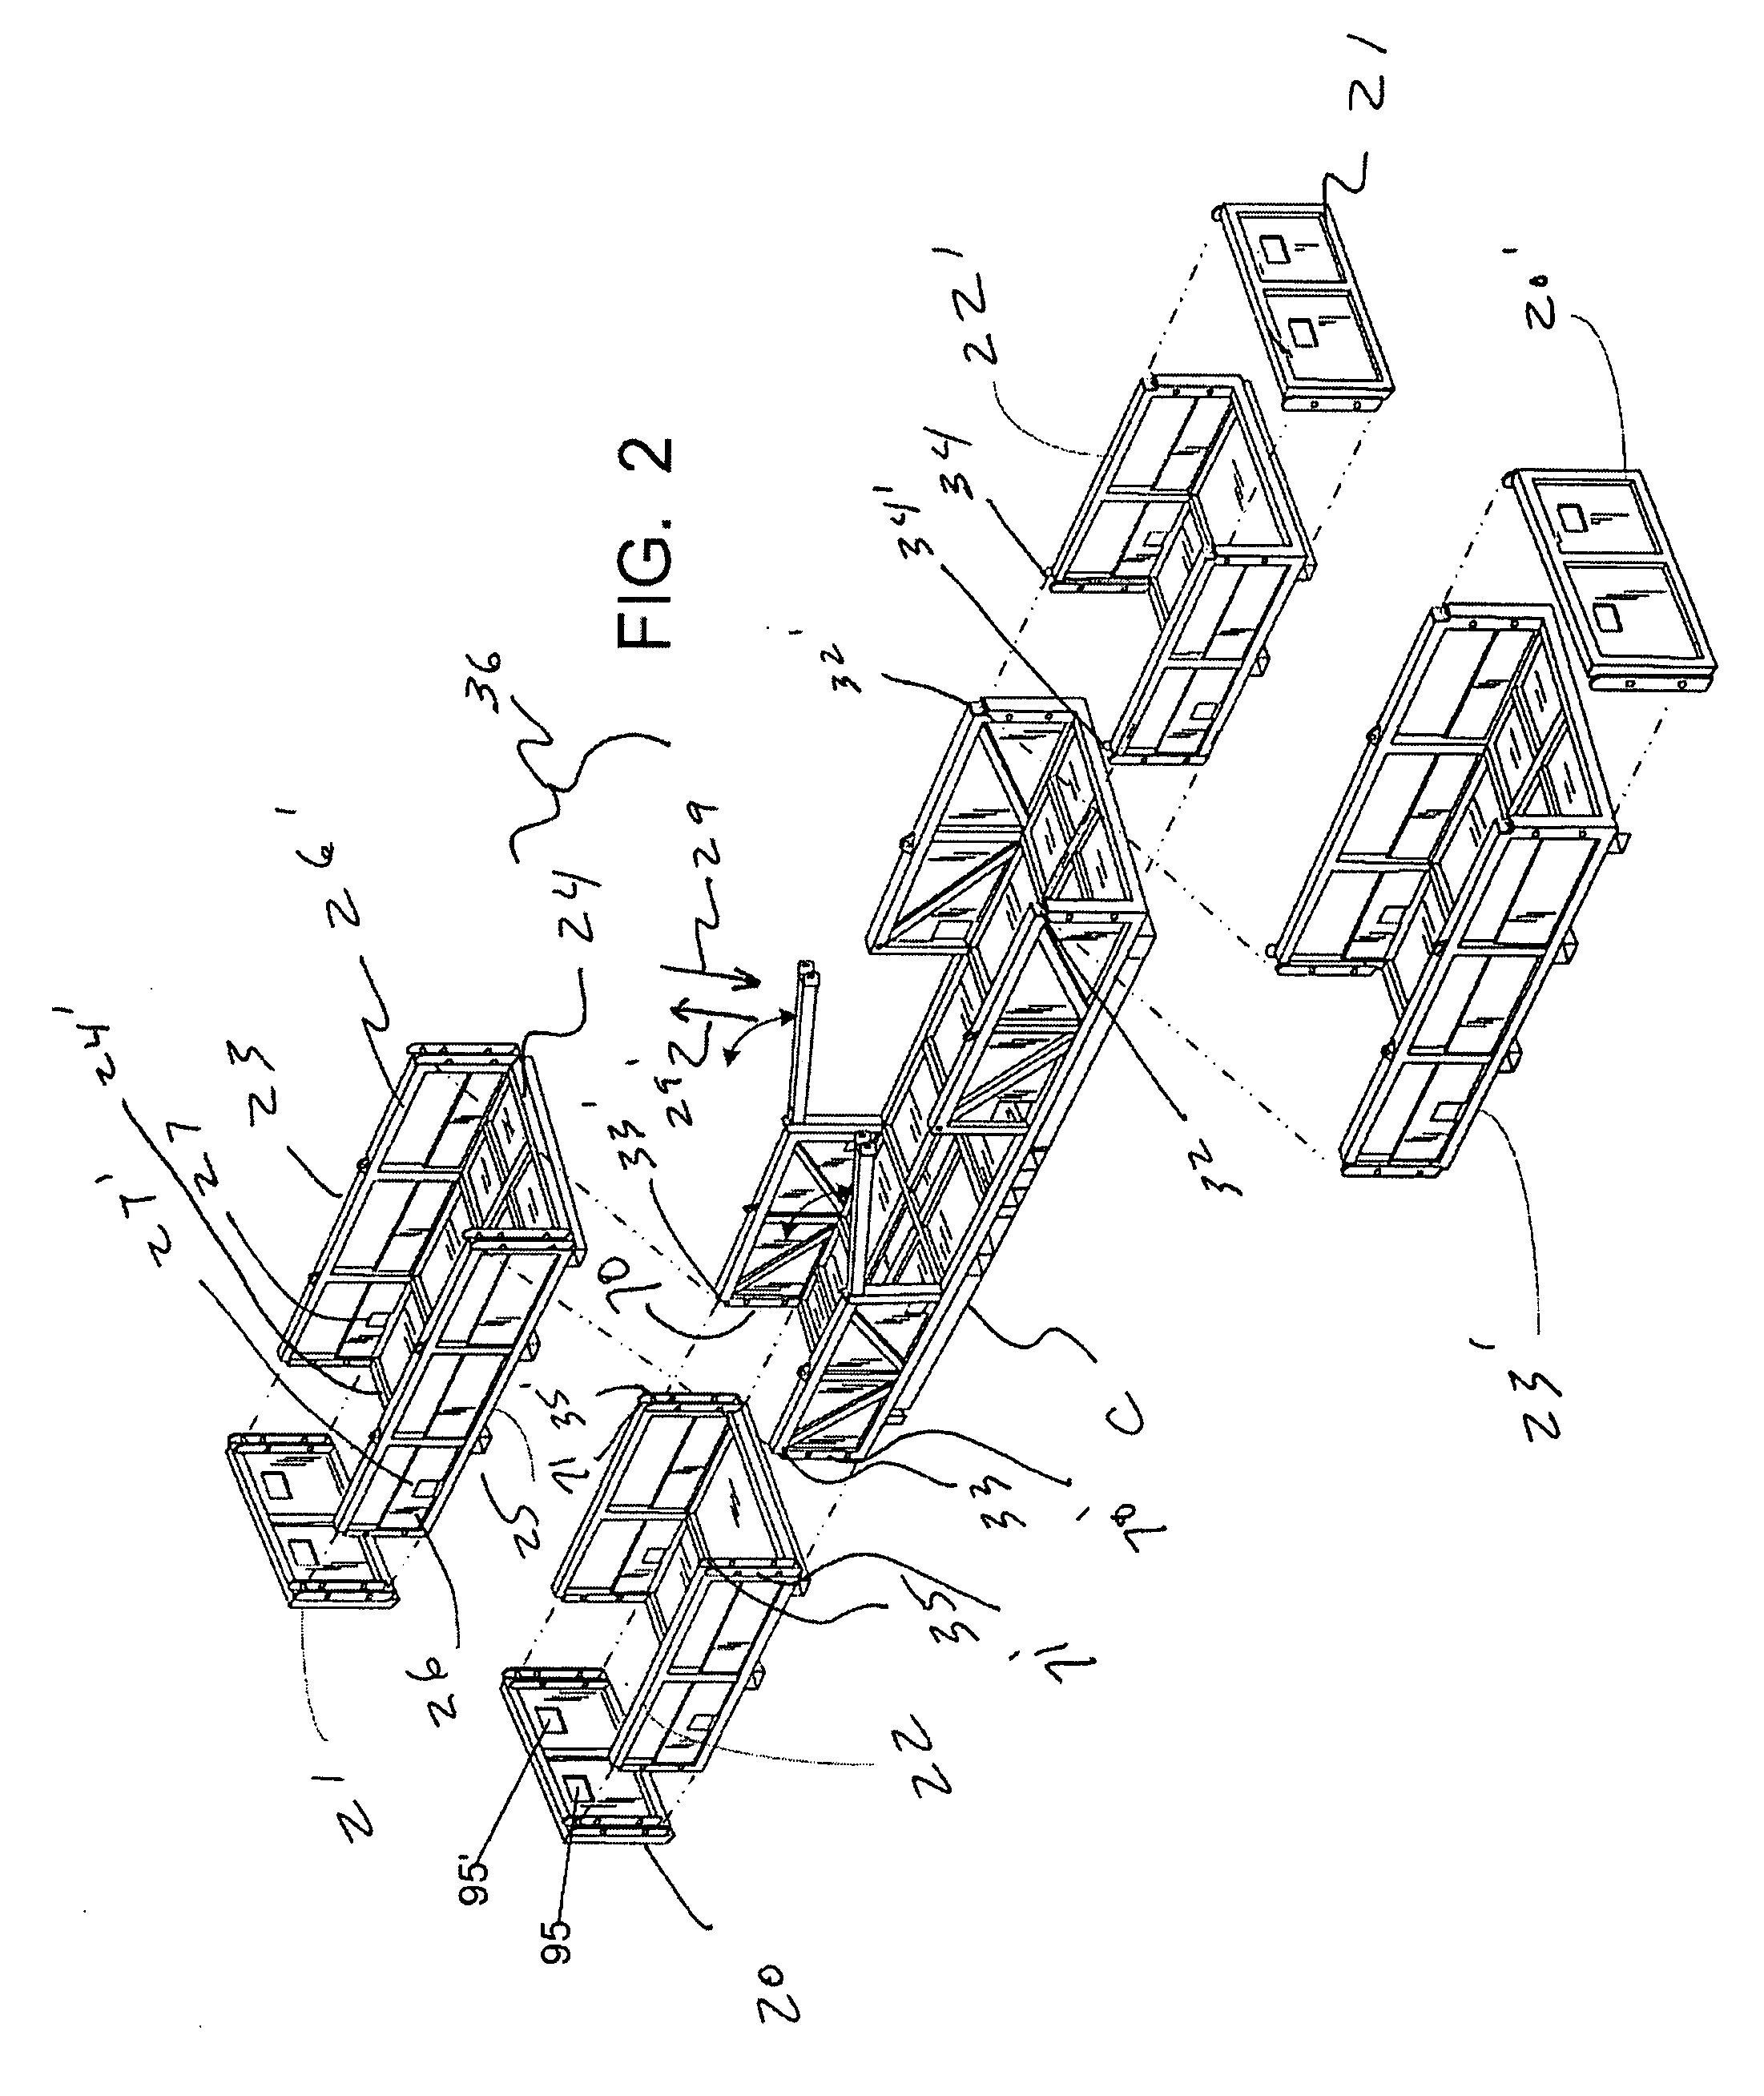 Extendable Cargo System and Method Therefore